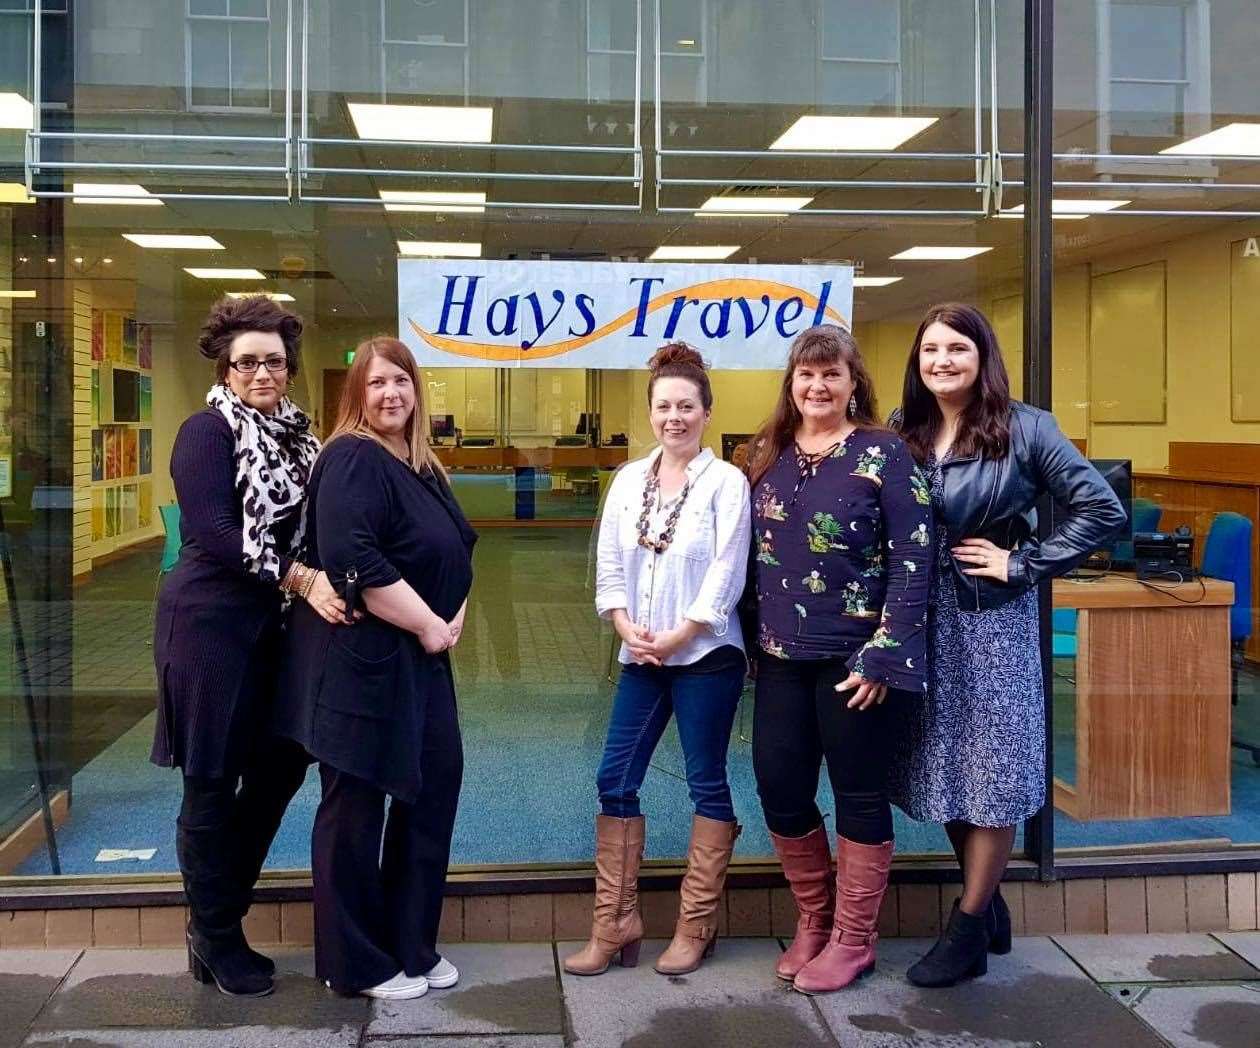 The former Thomas Cook team are returning to work as part of the Hays Travel group.